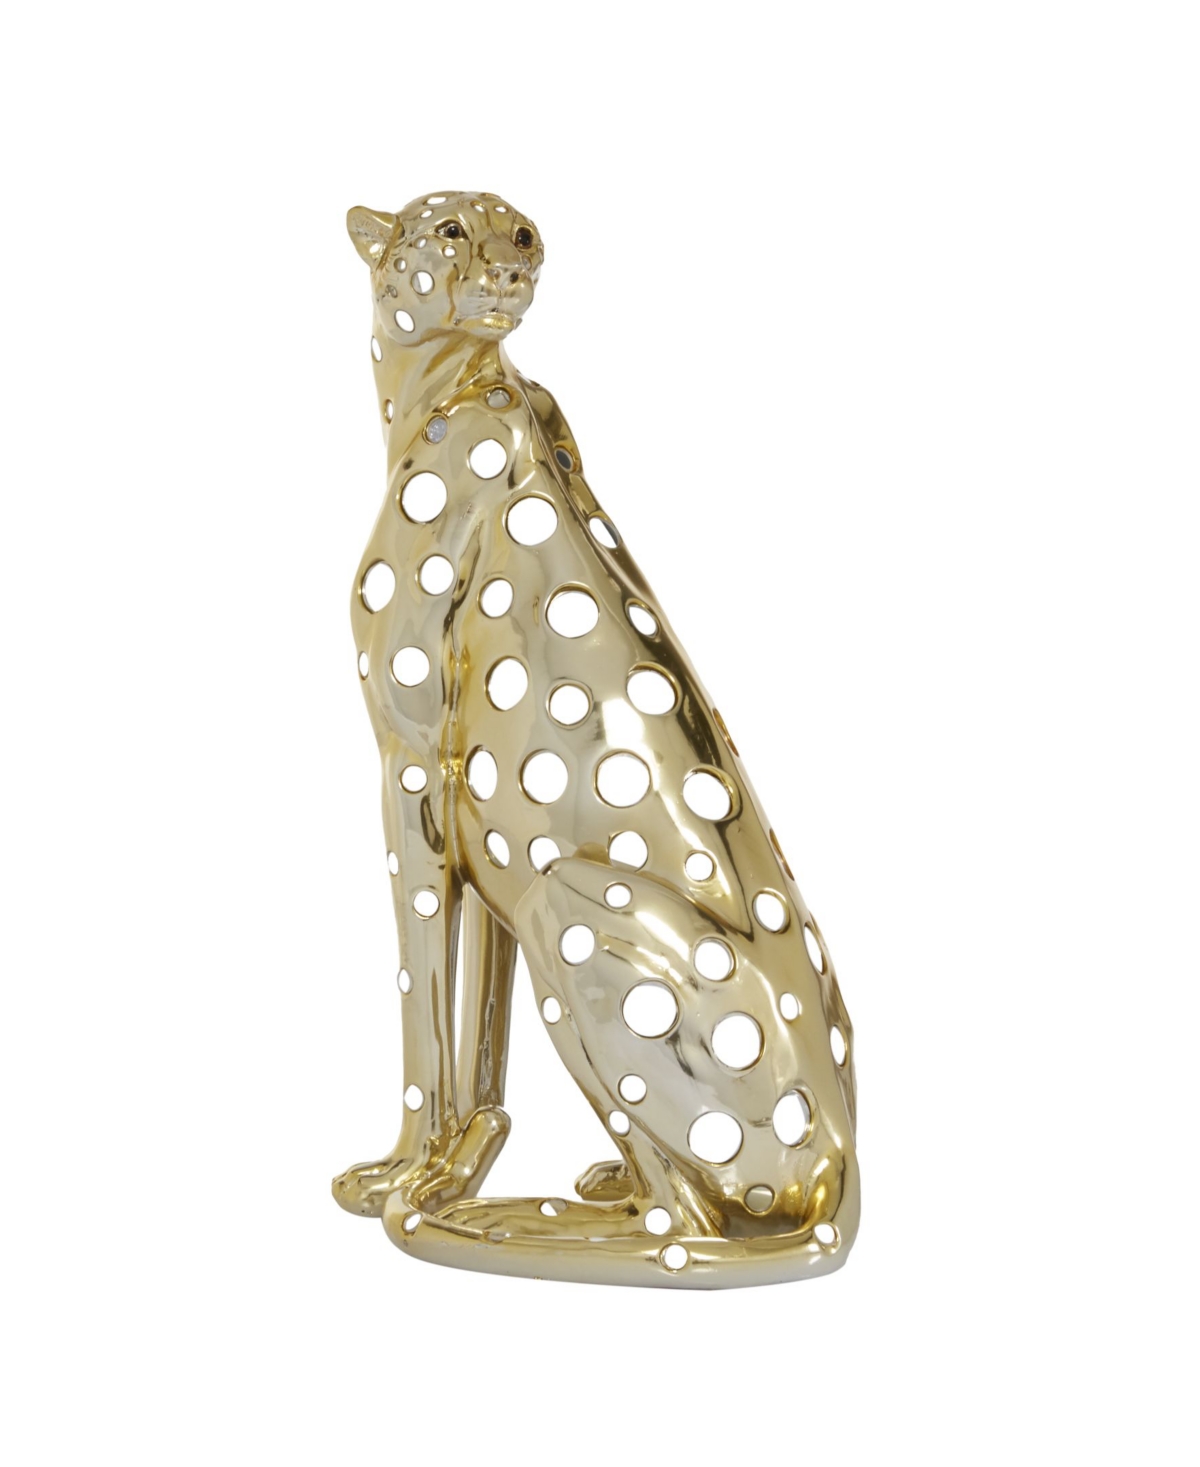 Rosemary Lane Glam Leopard Sculpture, 16" X 7" In Gold-tone